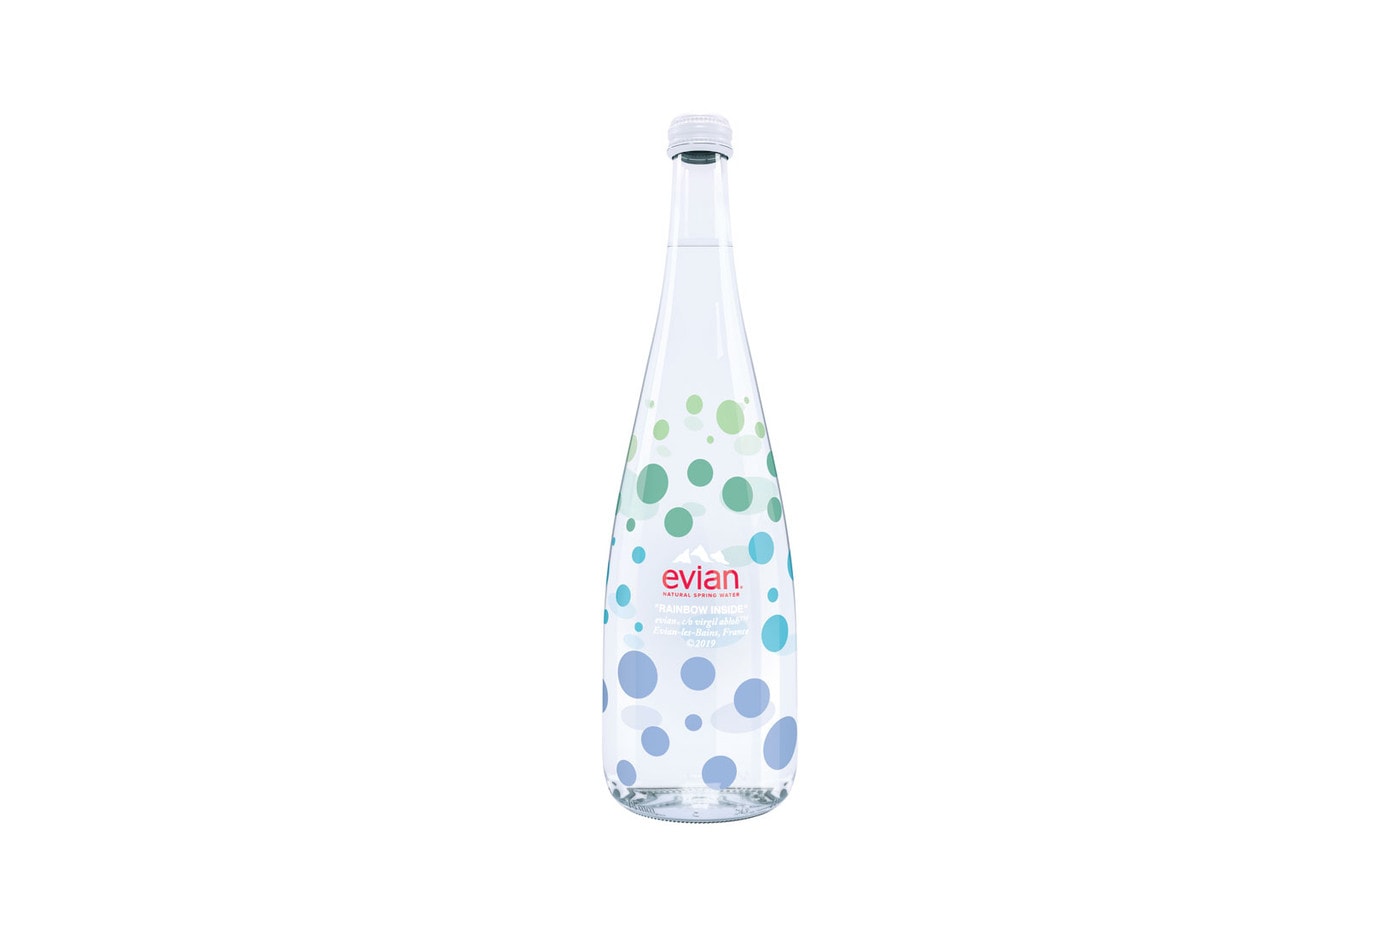 Virgil Abloh x Evian Glass Water Bottle Release "MAKE A RAINBOW" Print Exclusive Launch Collaboration 